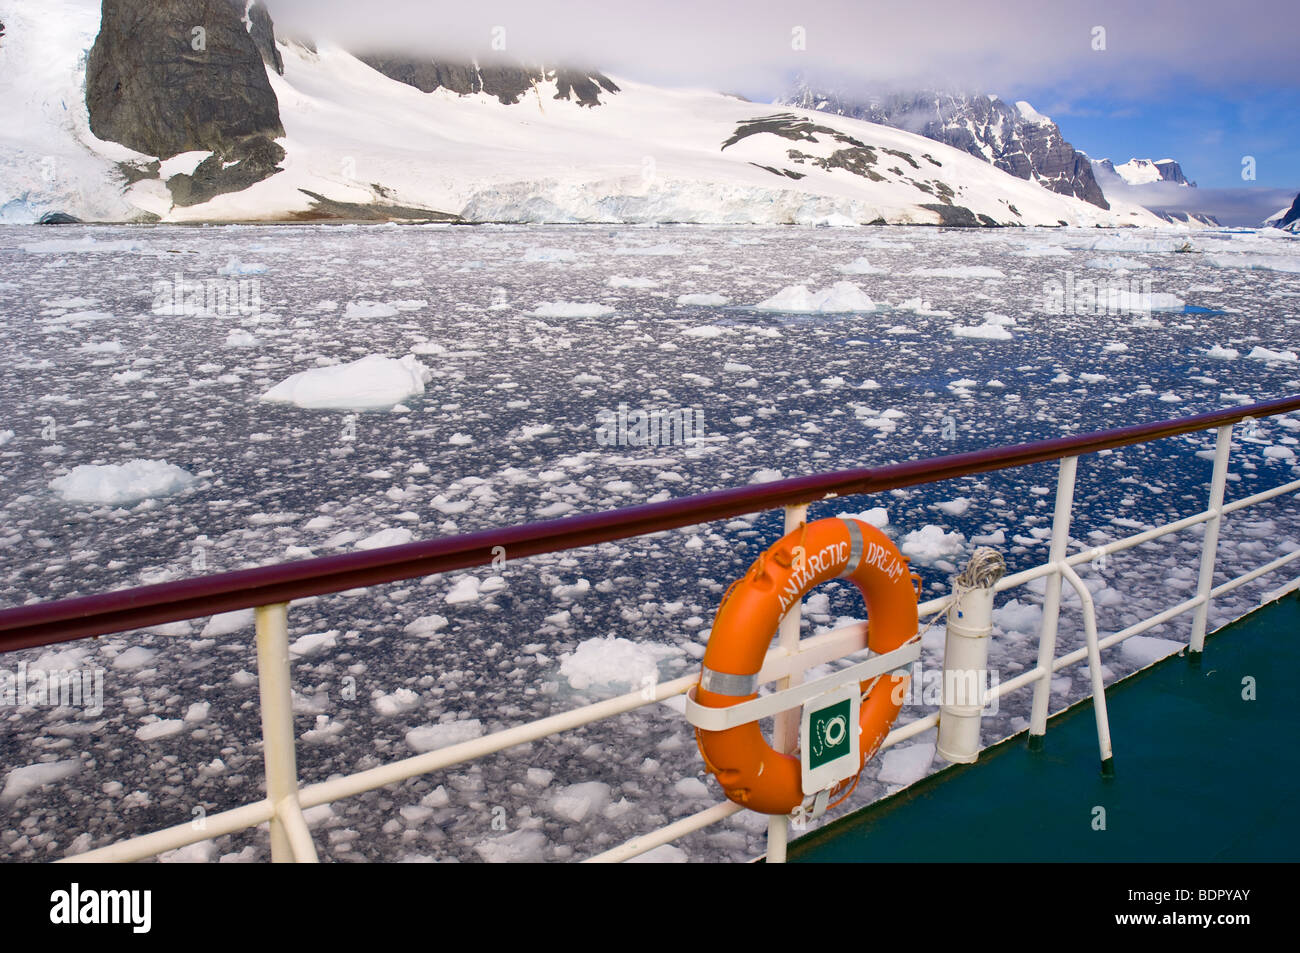 Life ring Antarctic Dream in Lemaire Channel, Antarctica. Stock Photo